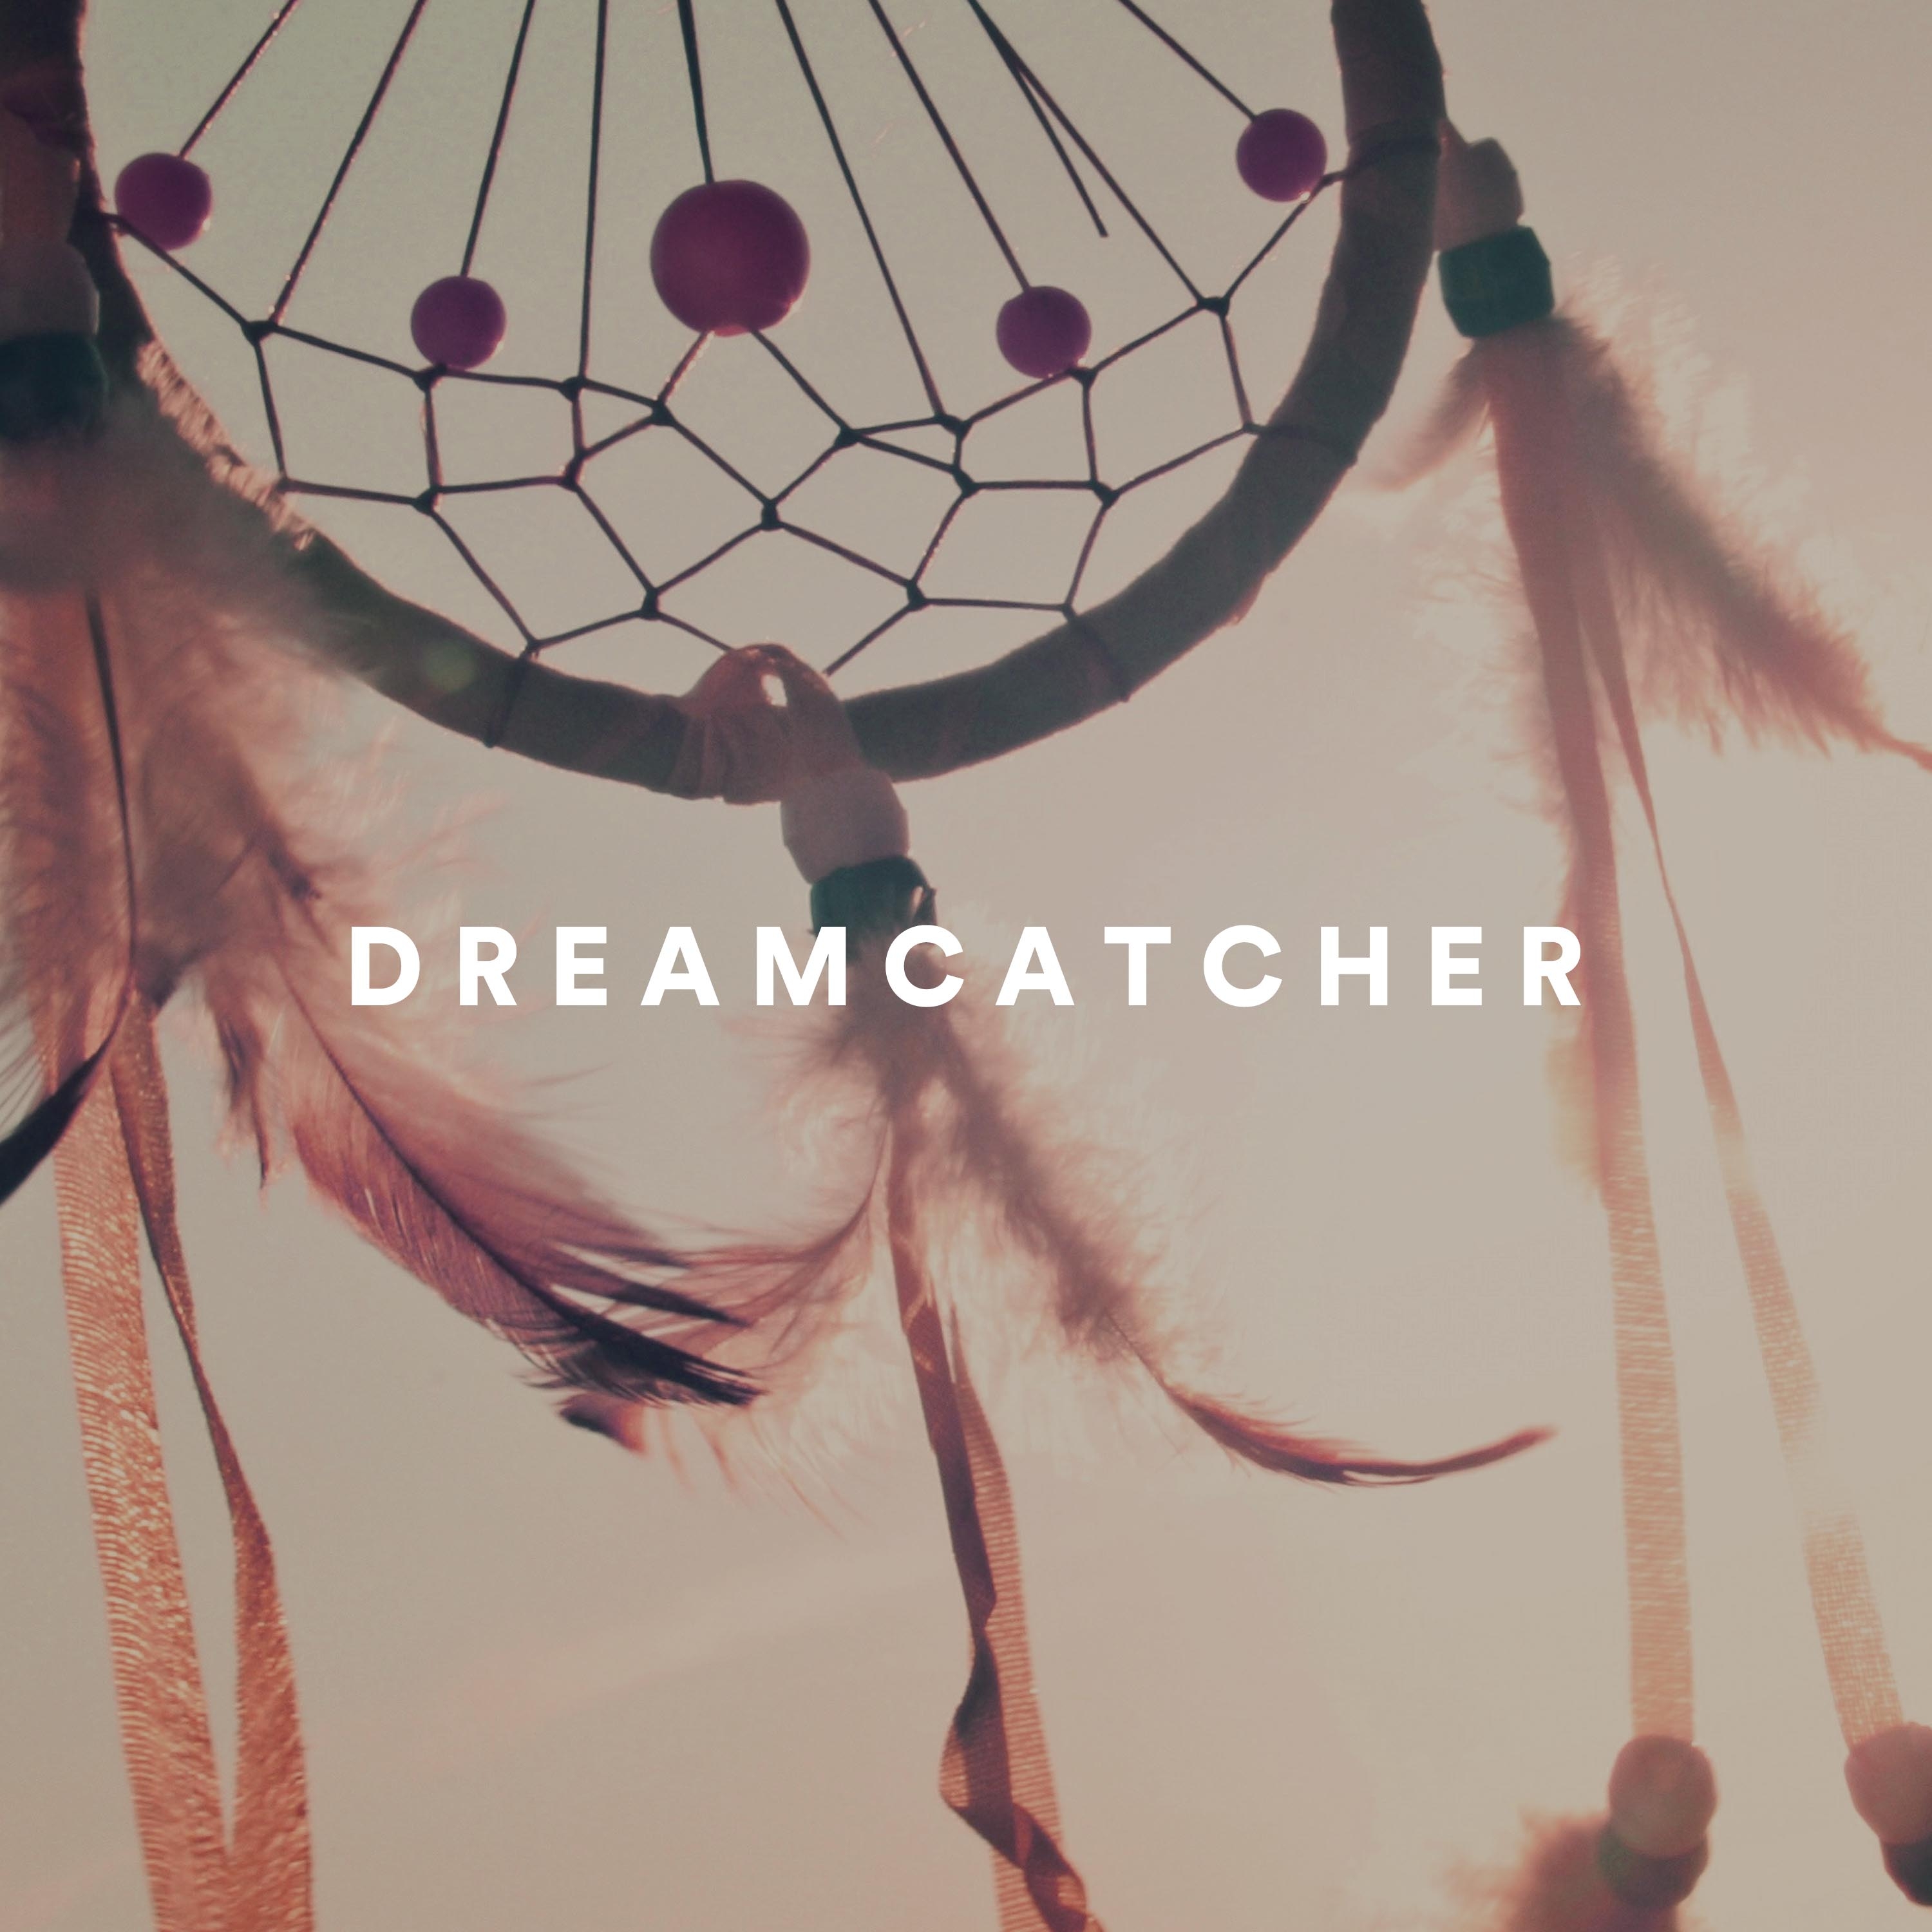 Dreamcatcher - Calm Music, Instrumental Relaxing Music for Reading, Concentration, Focus, Inspiring and Moving Songs for Relaxation